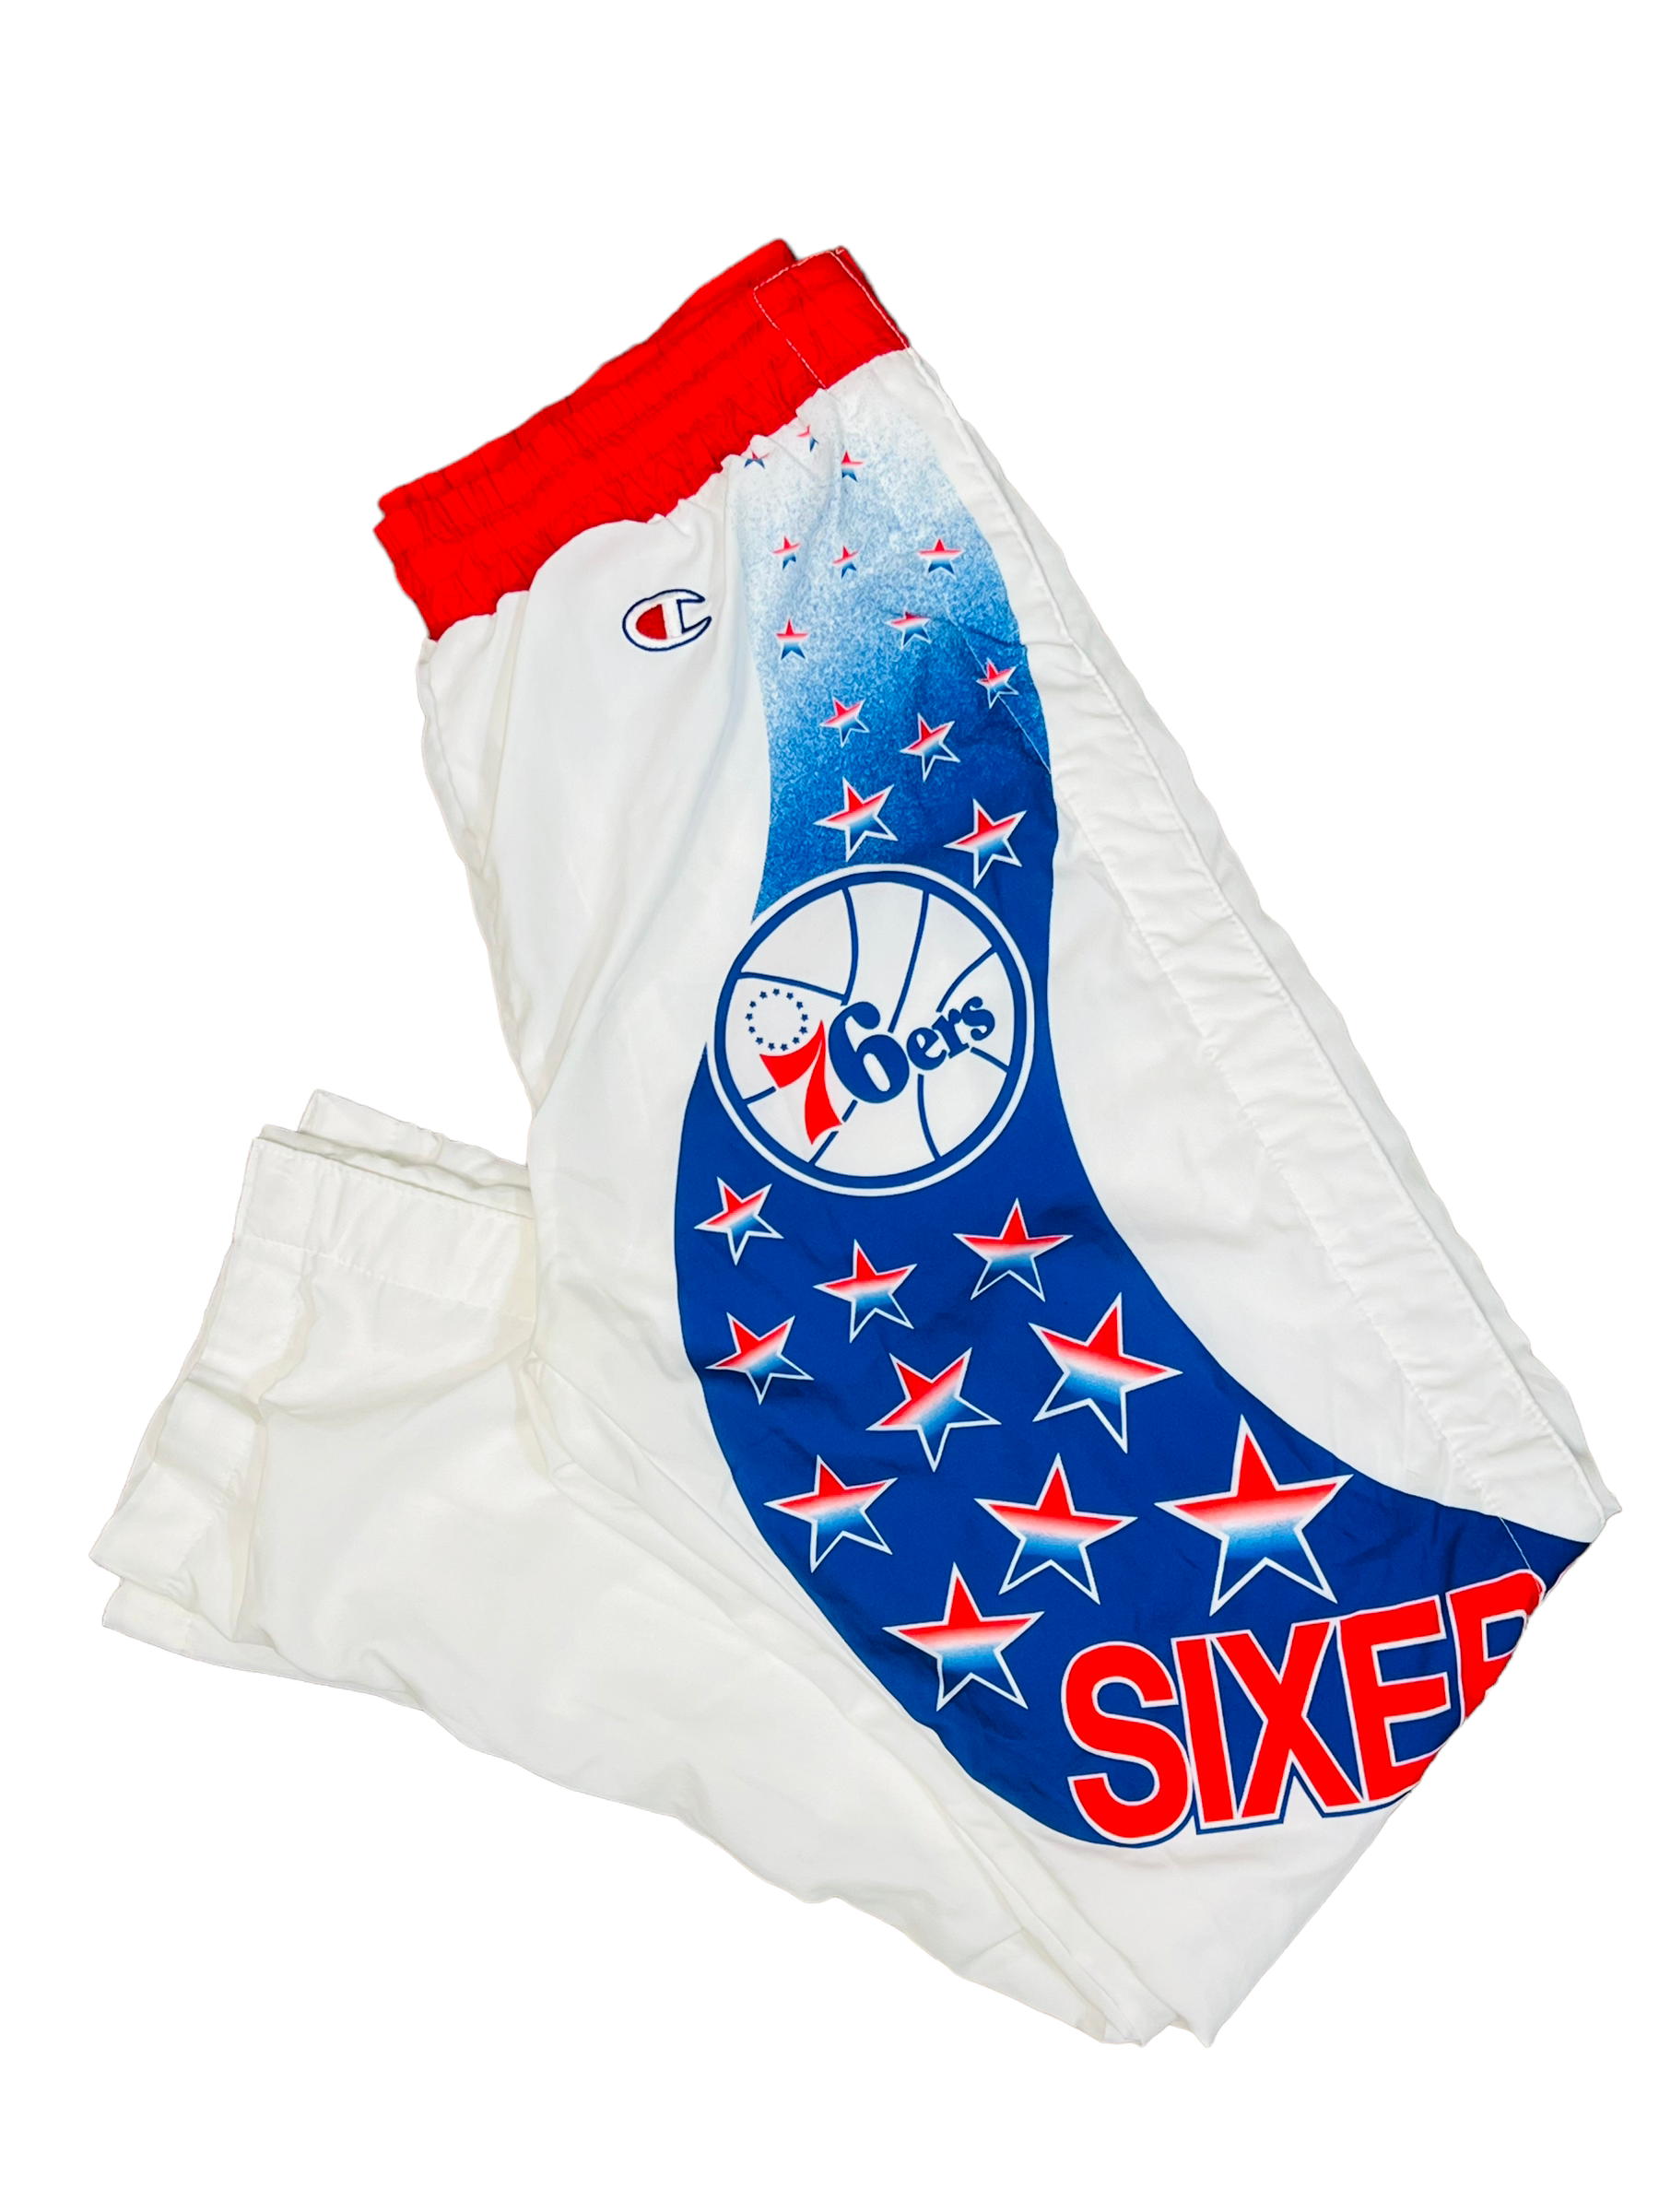 Philadelphia 76ers Sixers Basketball Shorts Brand New for Sale in